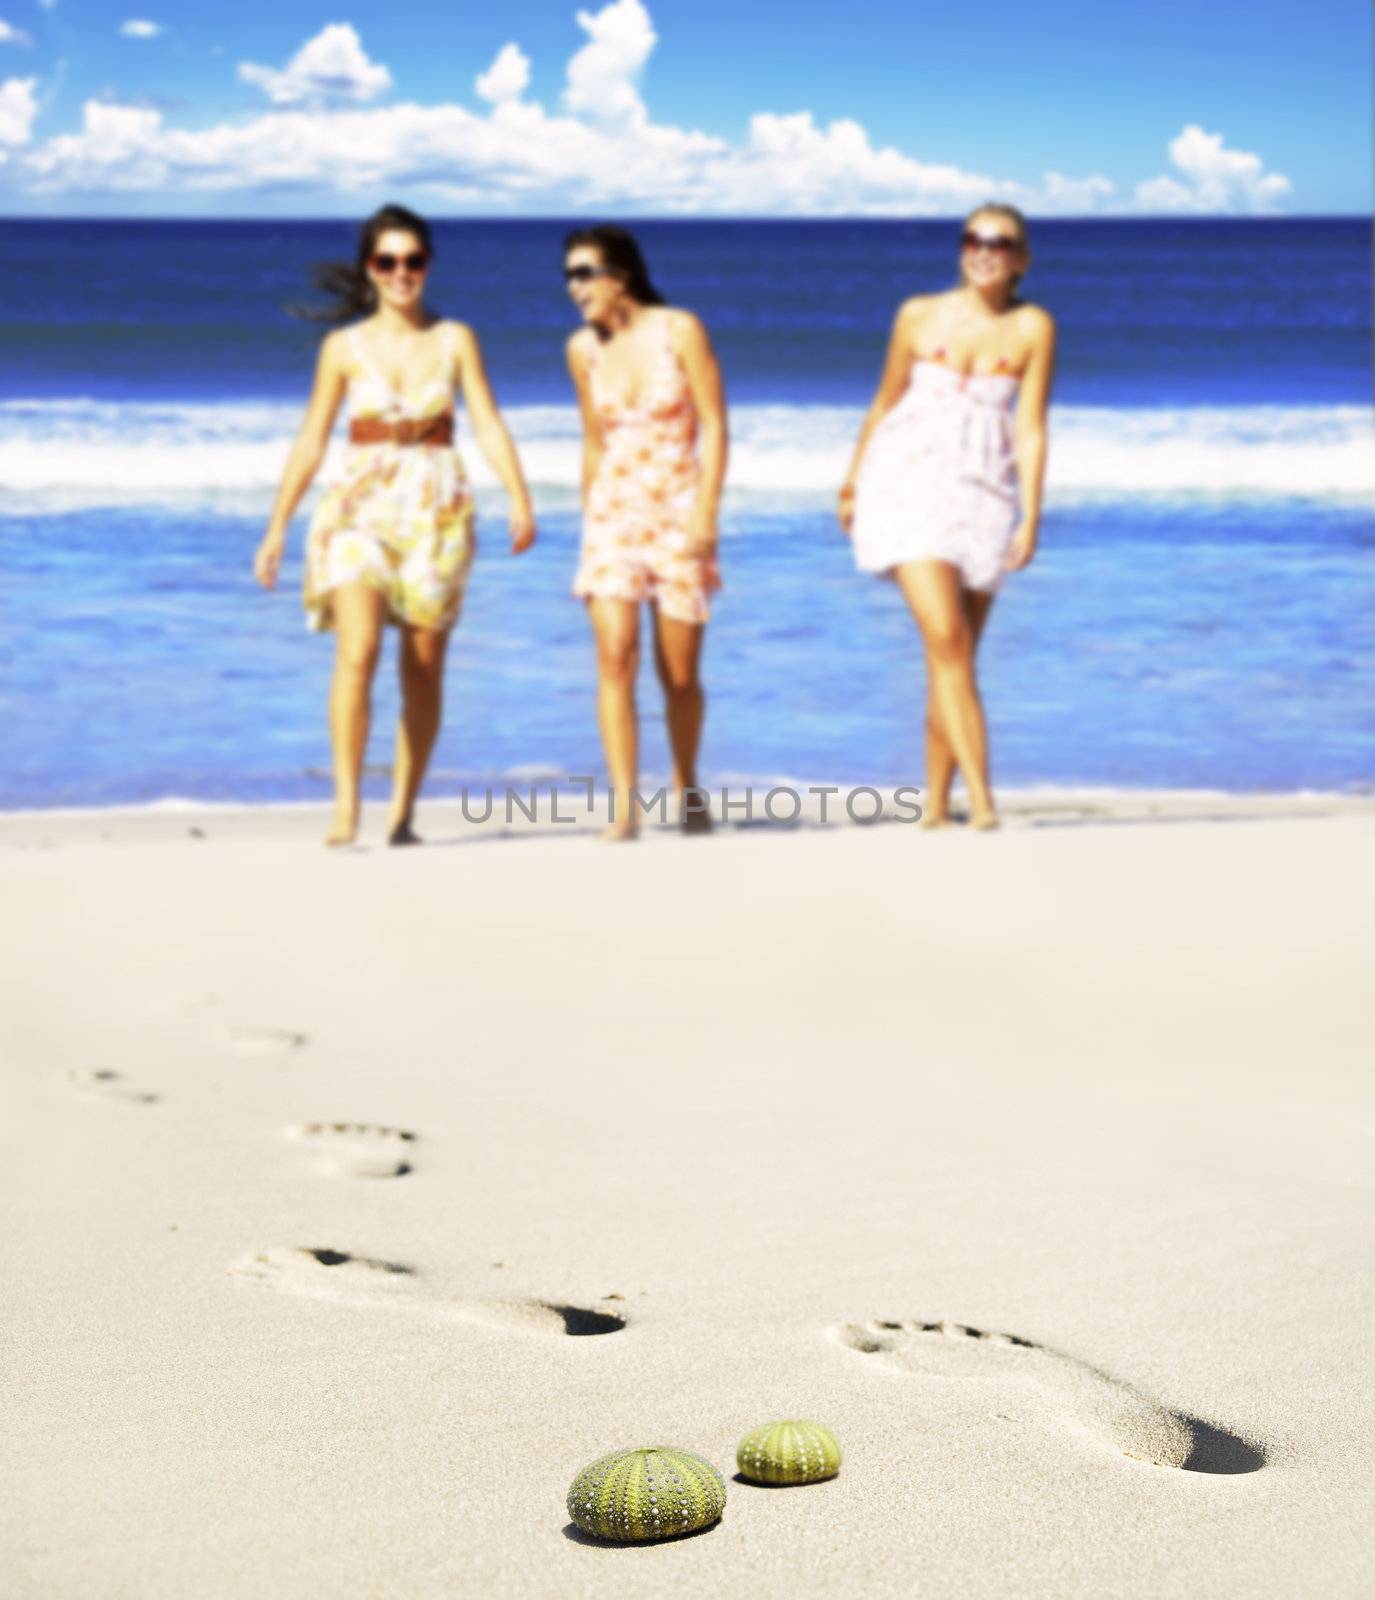 Sea urchin shells on the beach with three young women in the background